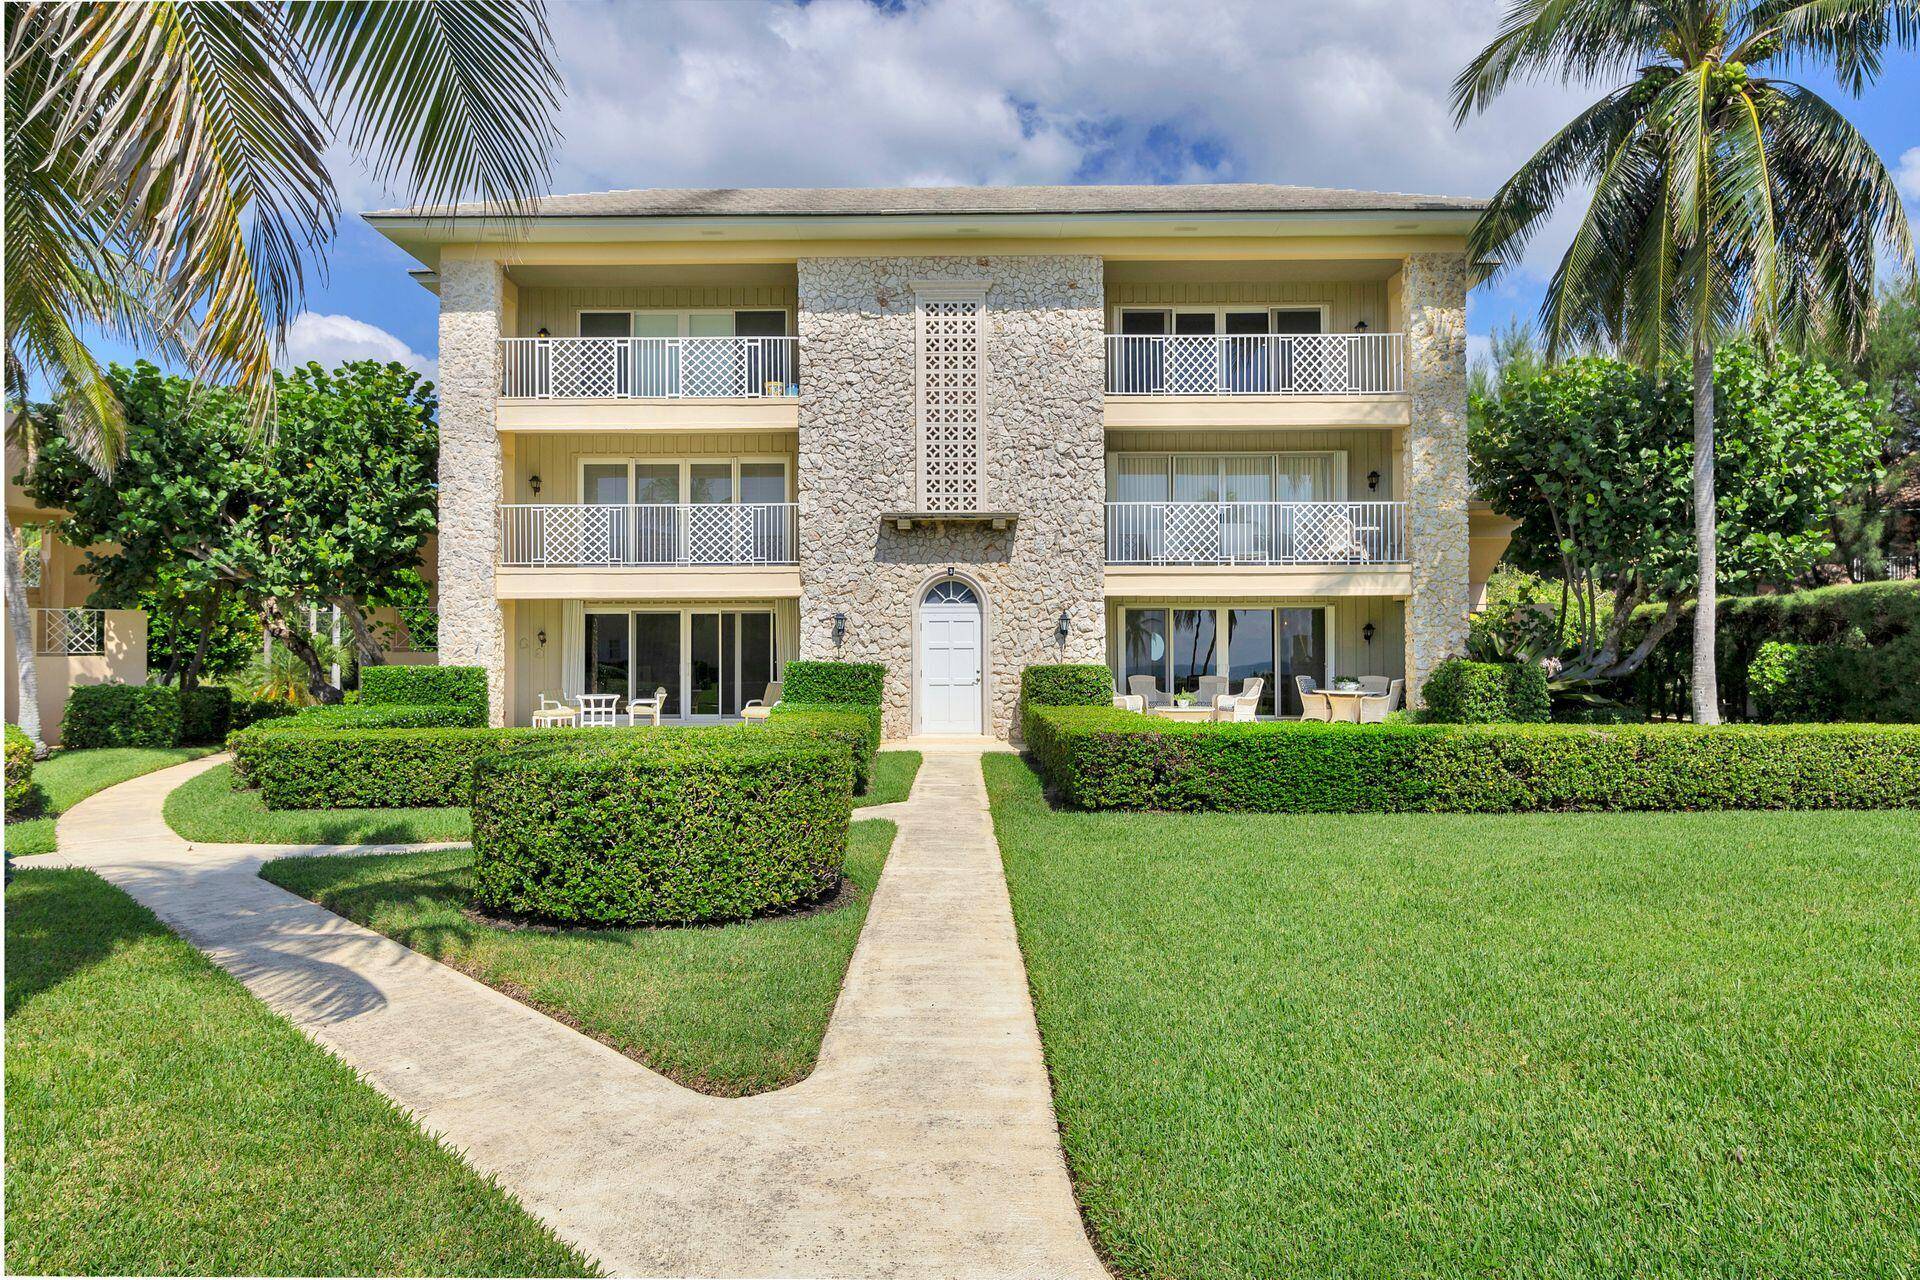 This is a rare opportunity to rent this beautiful apartment in desireable Bermuda High South in Delray Beach !